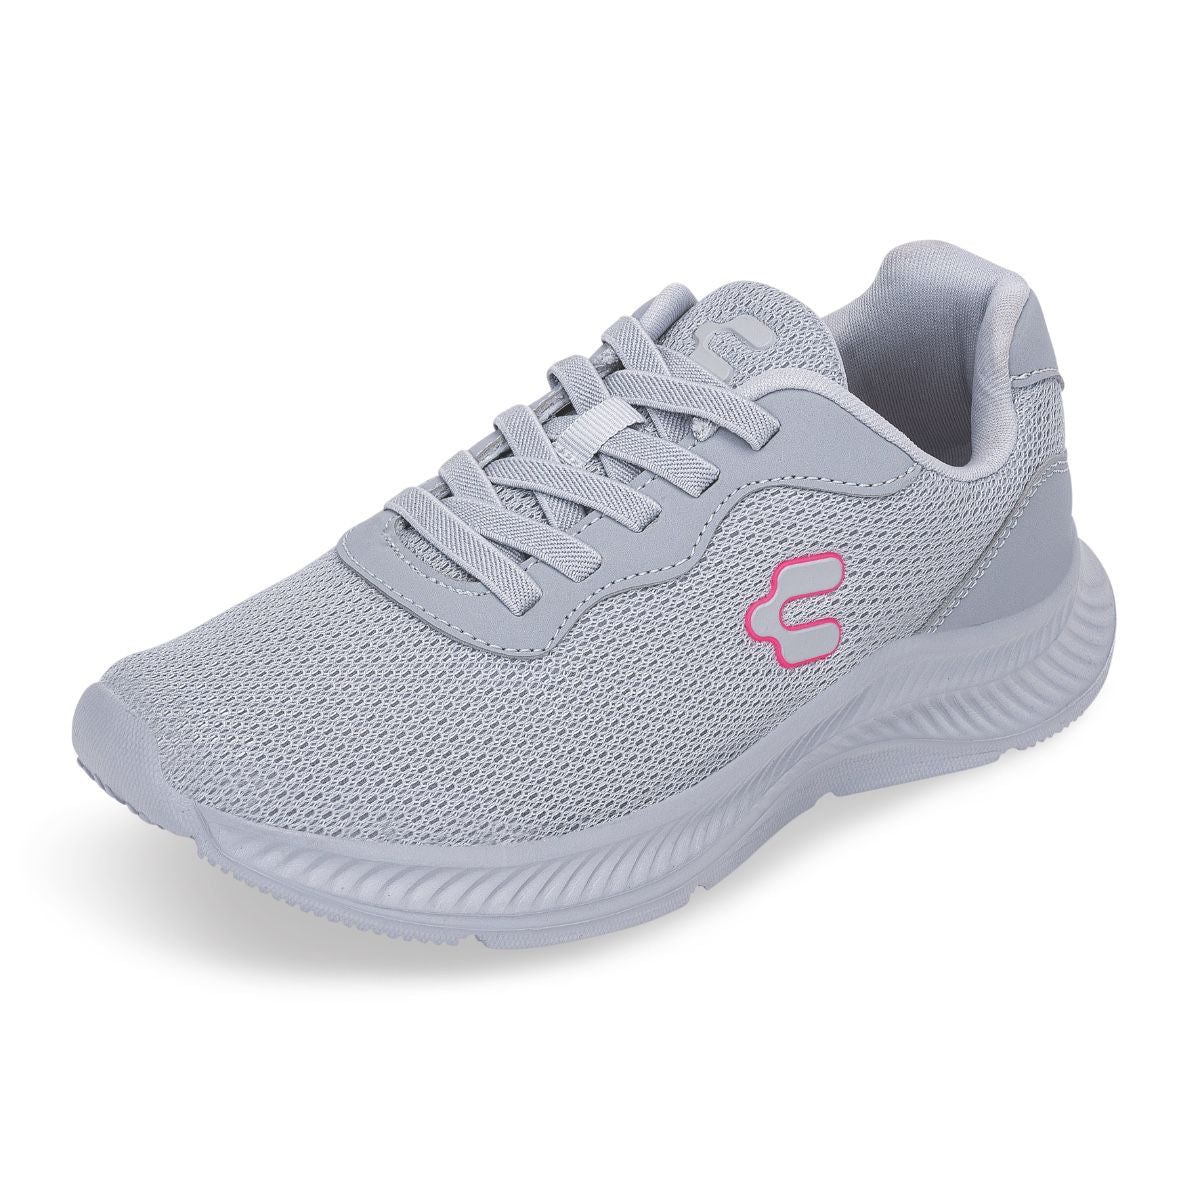 DEPORTIVO MUJER CHARLY 9229 GRIS/GRIS